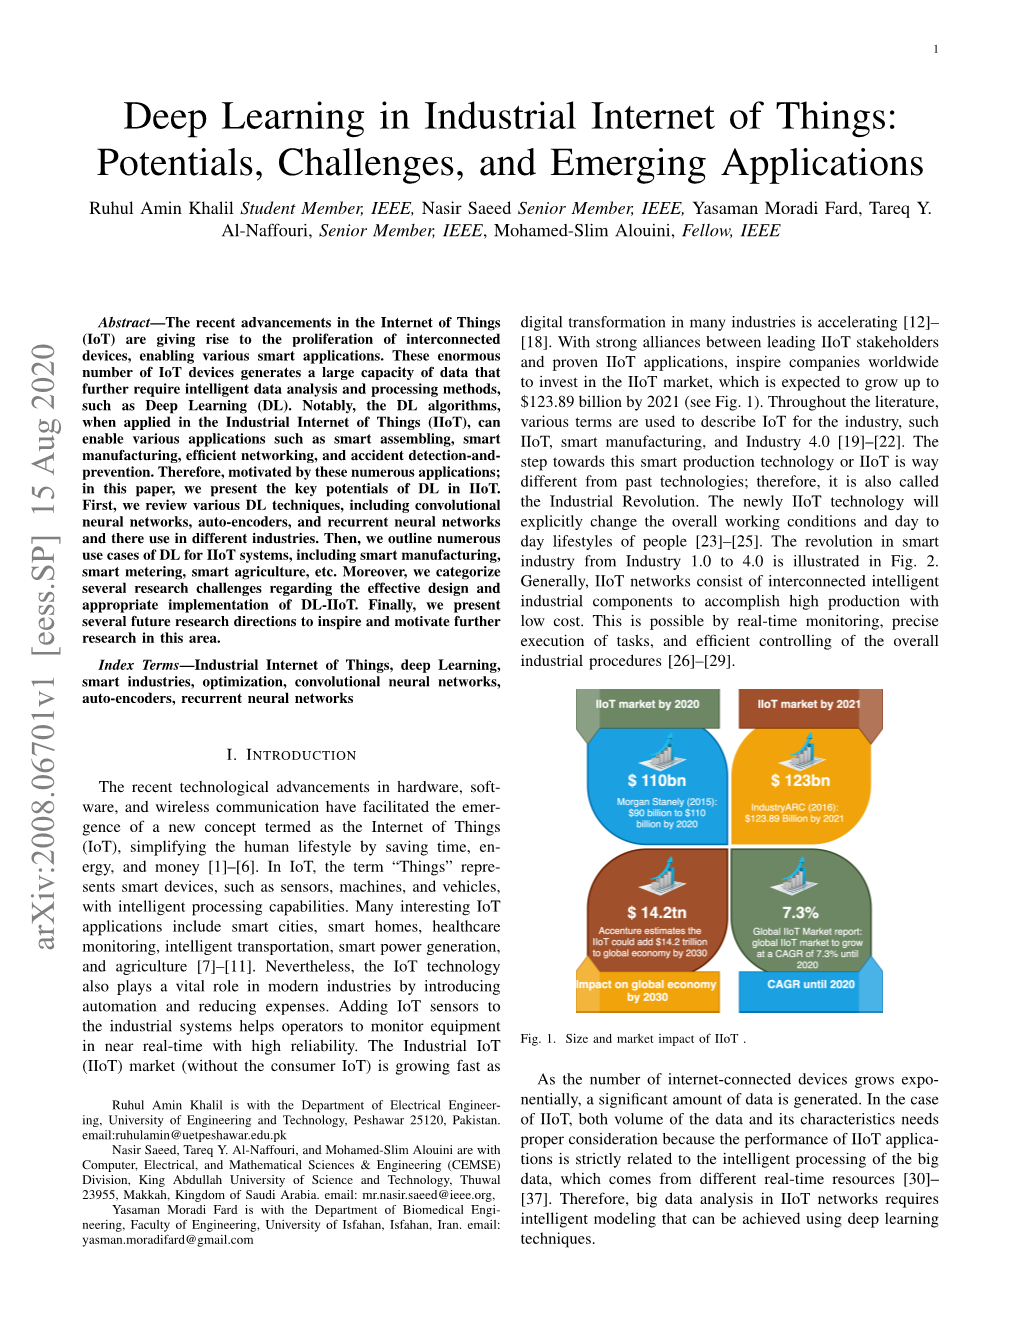 Deep Learning in Industrial Internet of Things: Potentials, Challenges, And